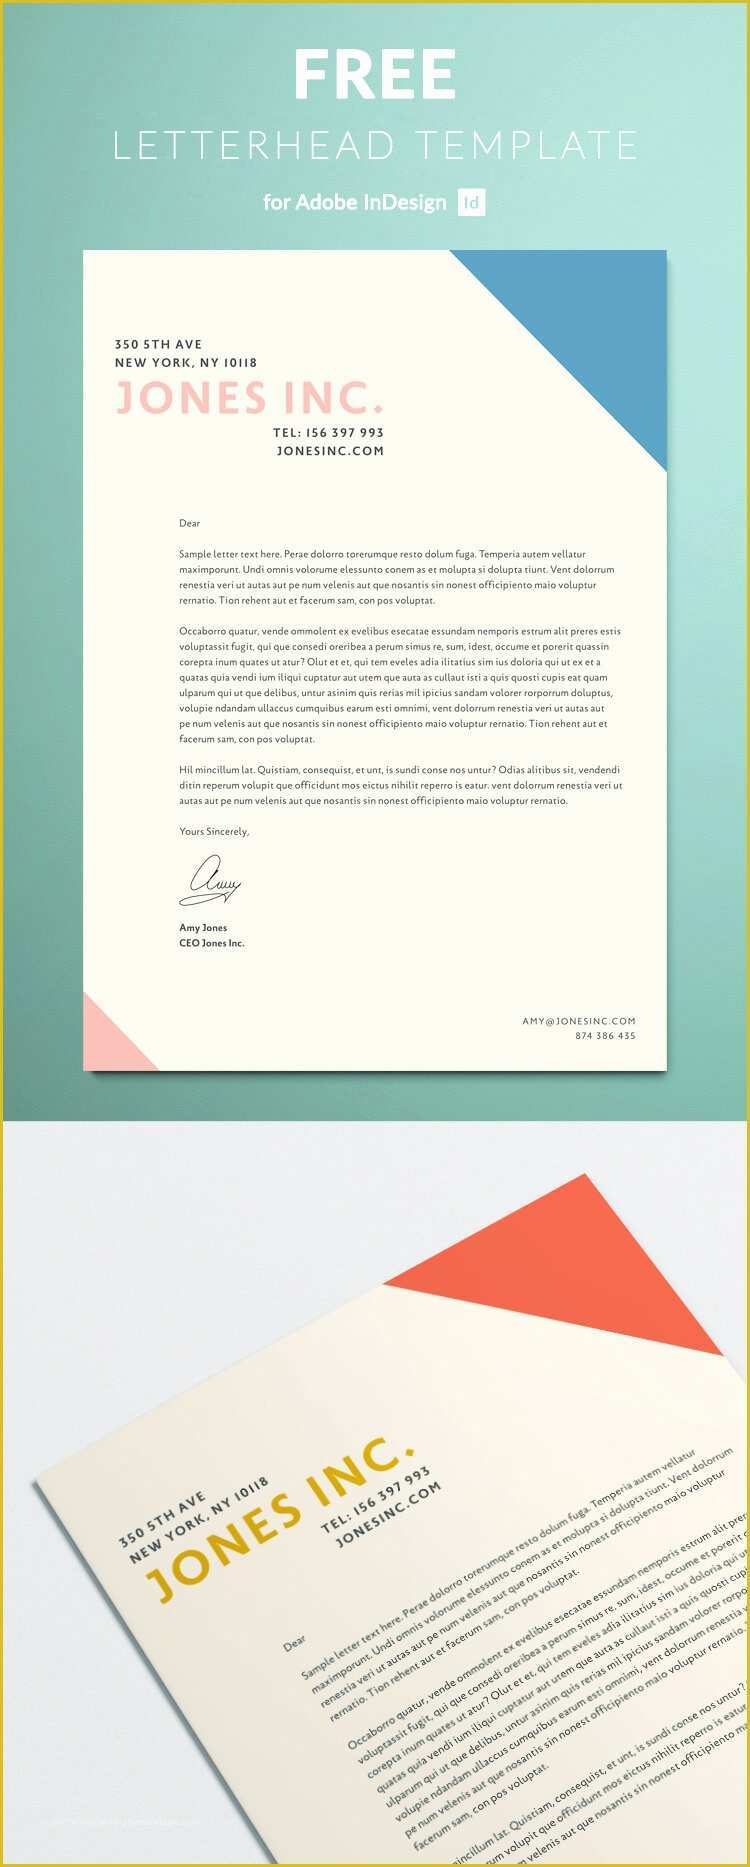 Free Letter Design Templates Of Letterhead Template for Indesign